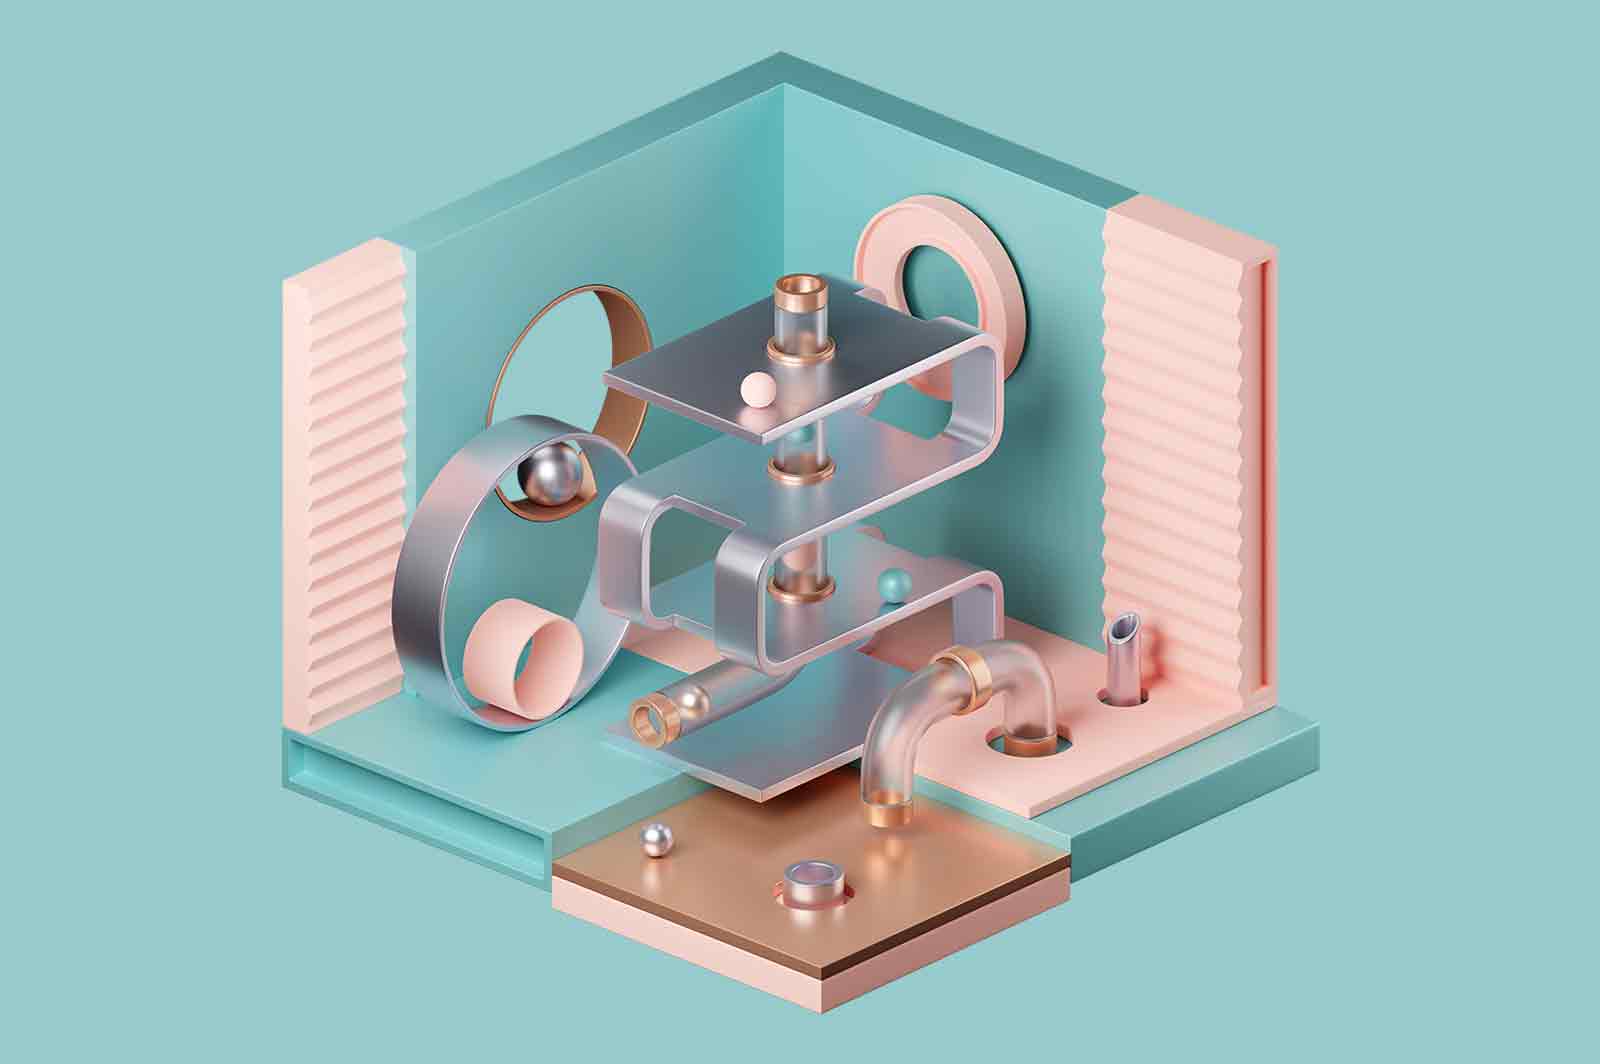 Abstract composition of details in pastel colors 3d rendered illustration. Ceramic, metal and plastic details. Components of single mechanism concept